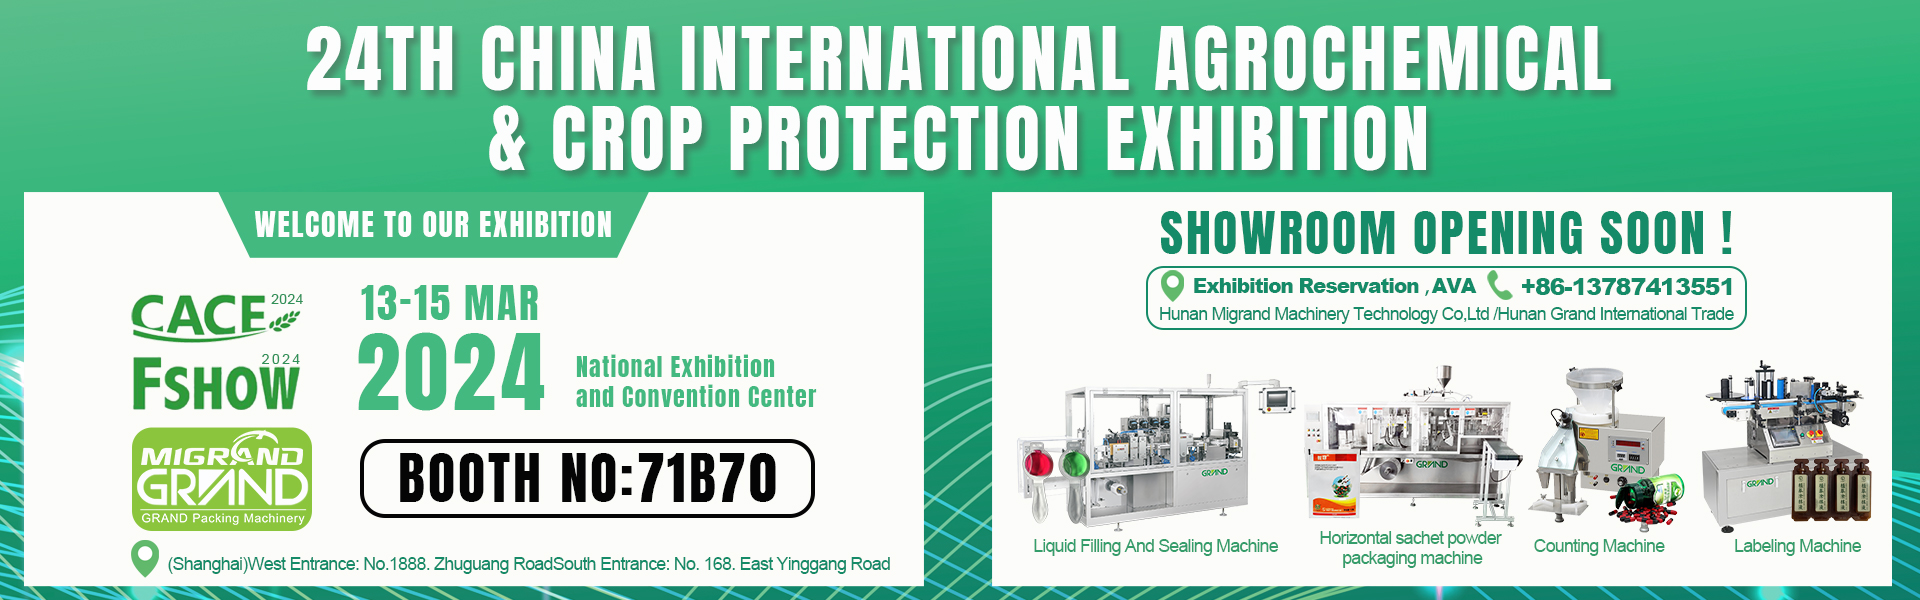 CAC2024 24th China International Agrochemical& Crop Protection Exhibition